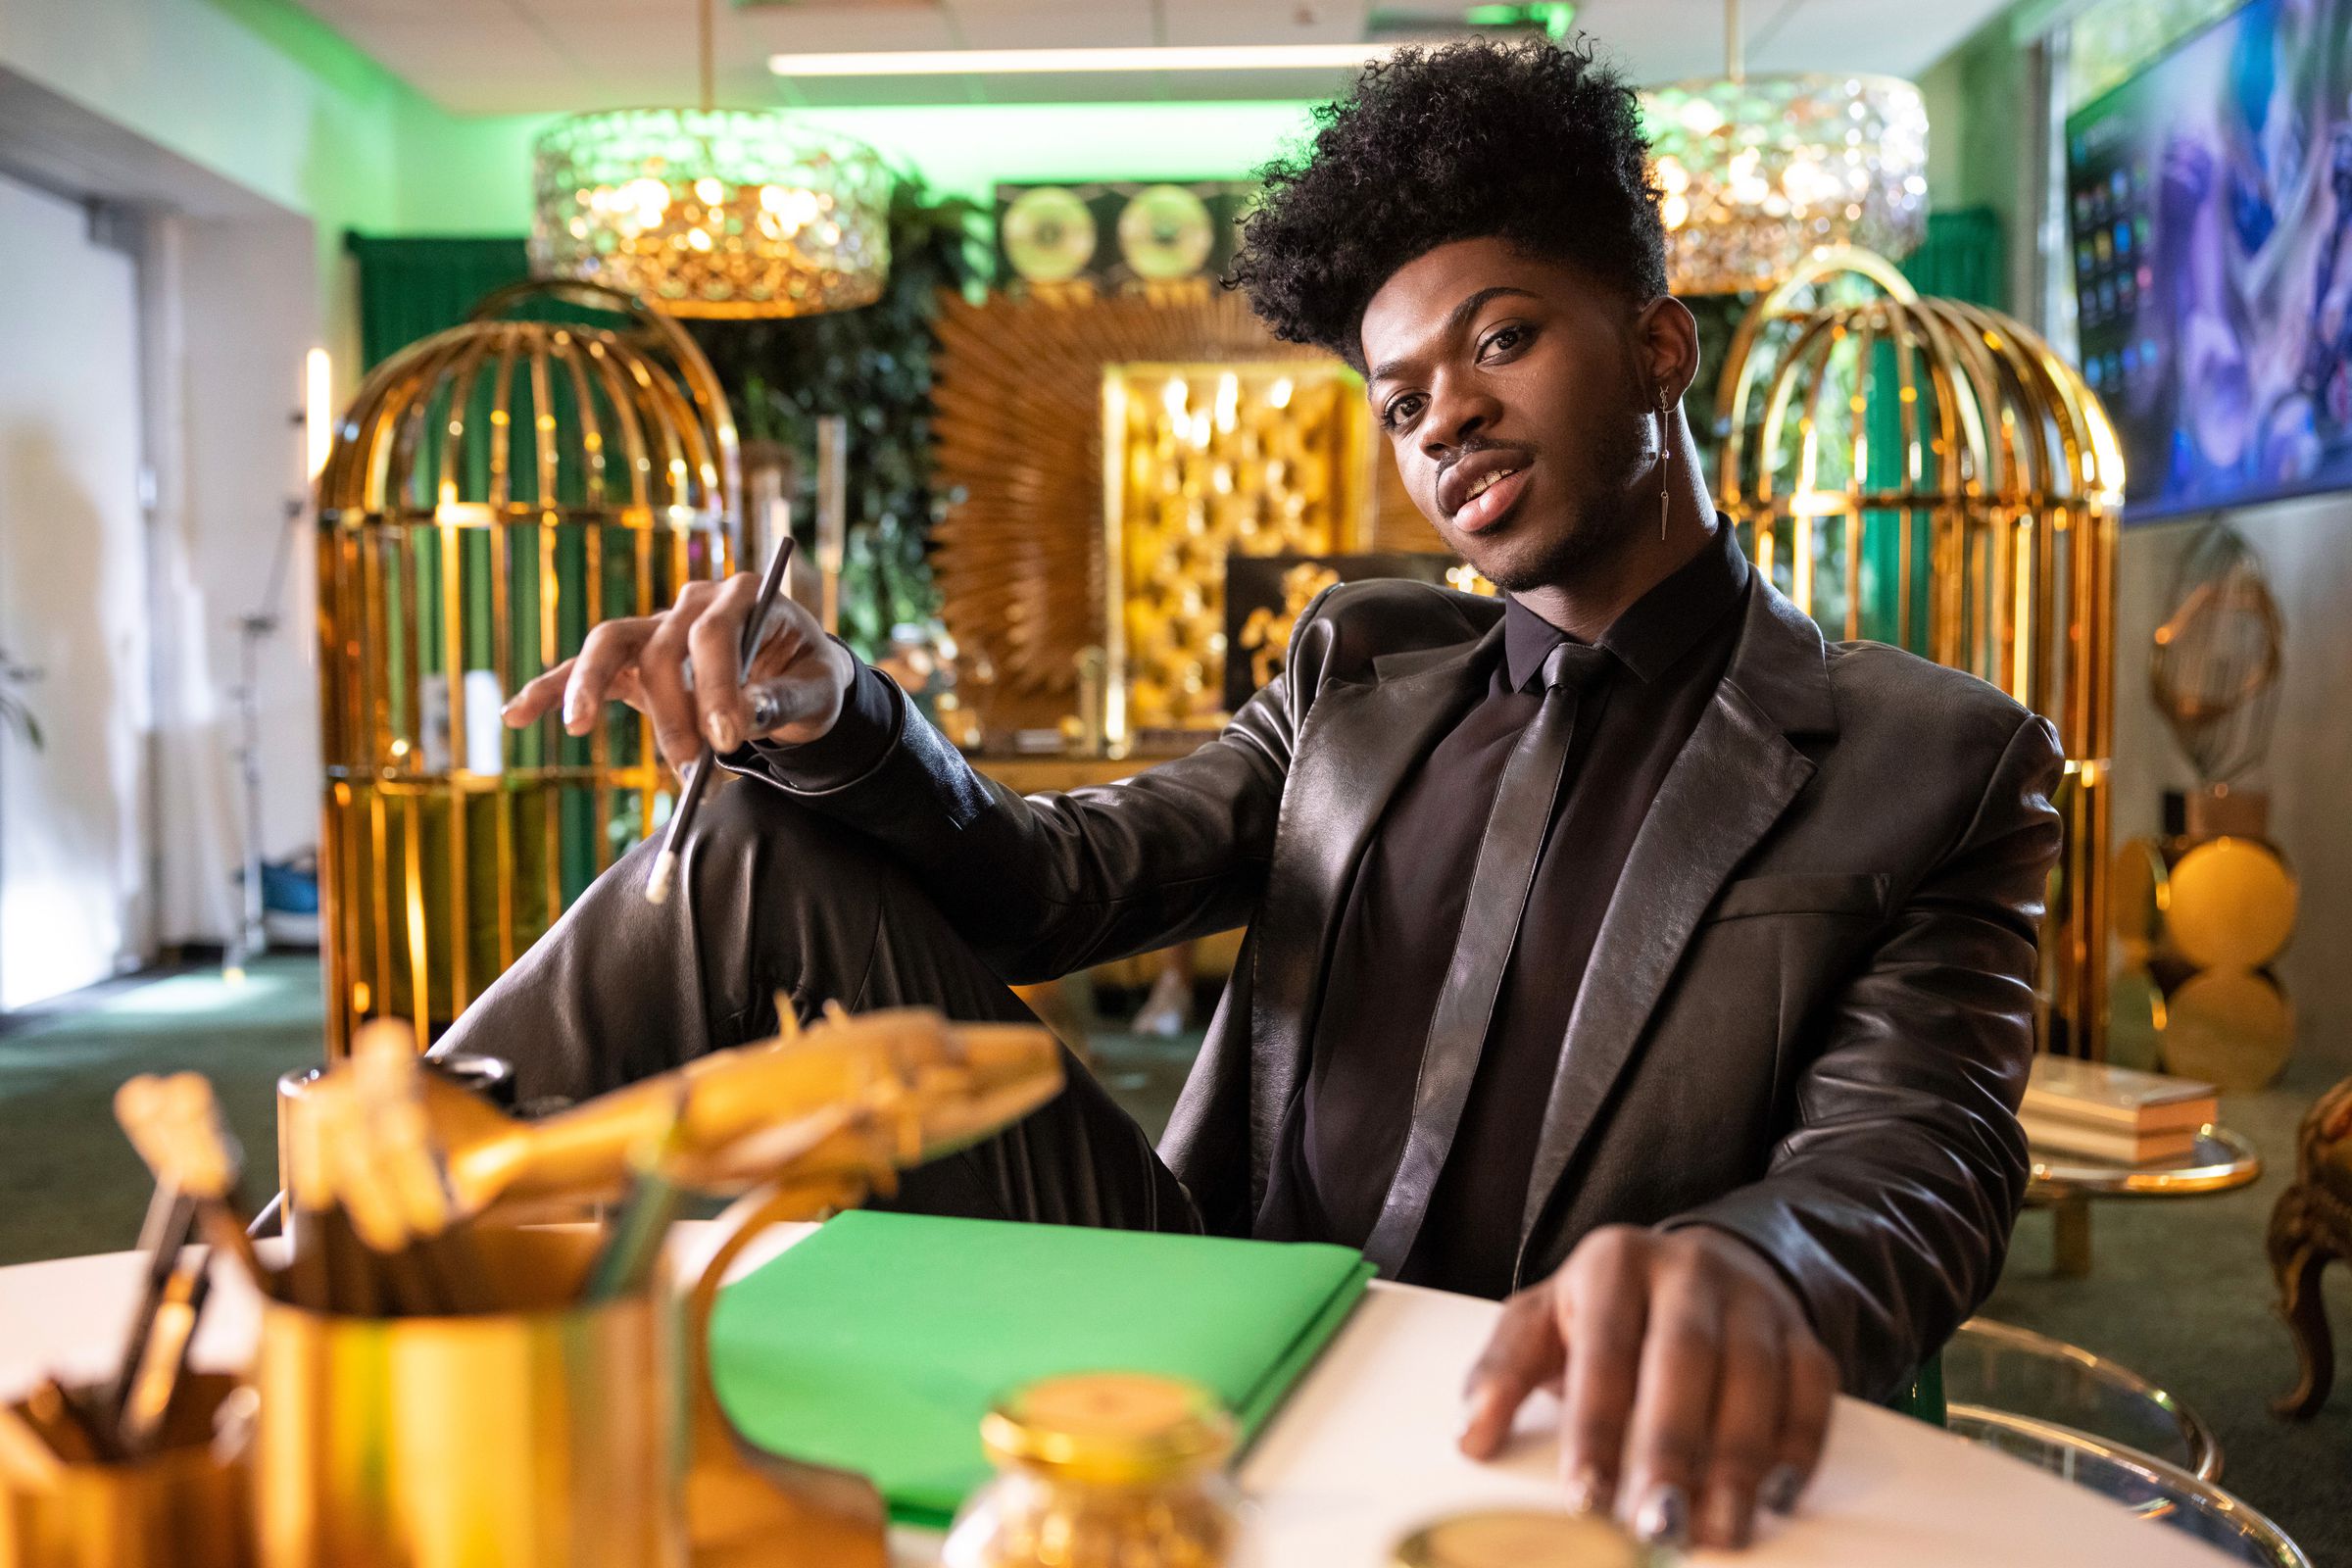 A photo of Lil Nas X in an all-black outfit, seated at a table in a room filled with gold accents.